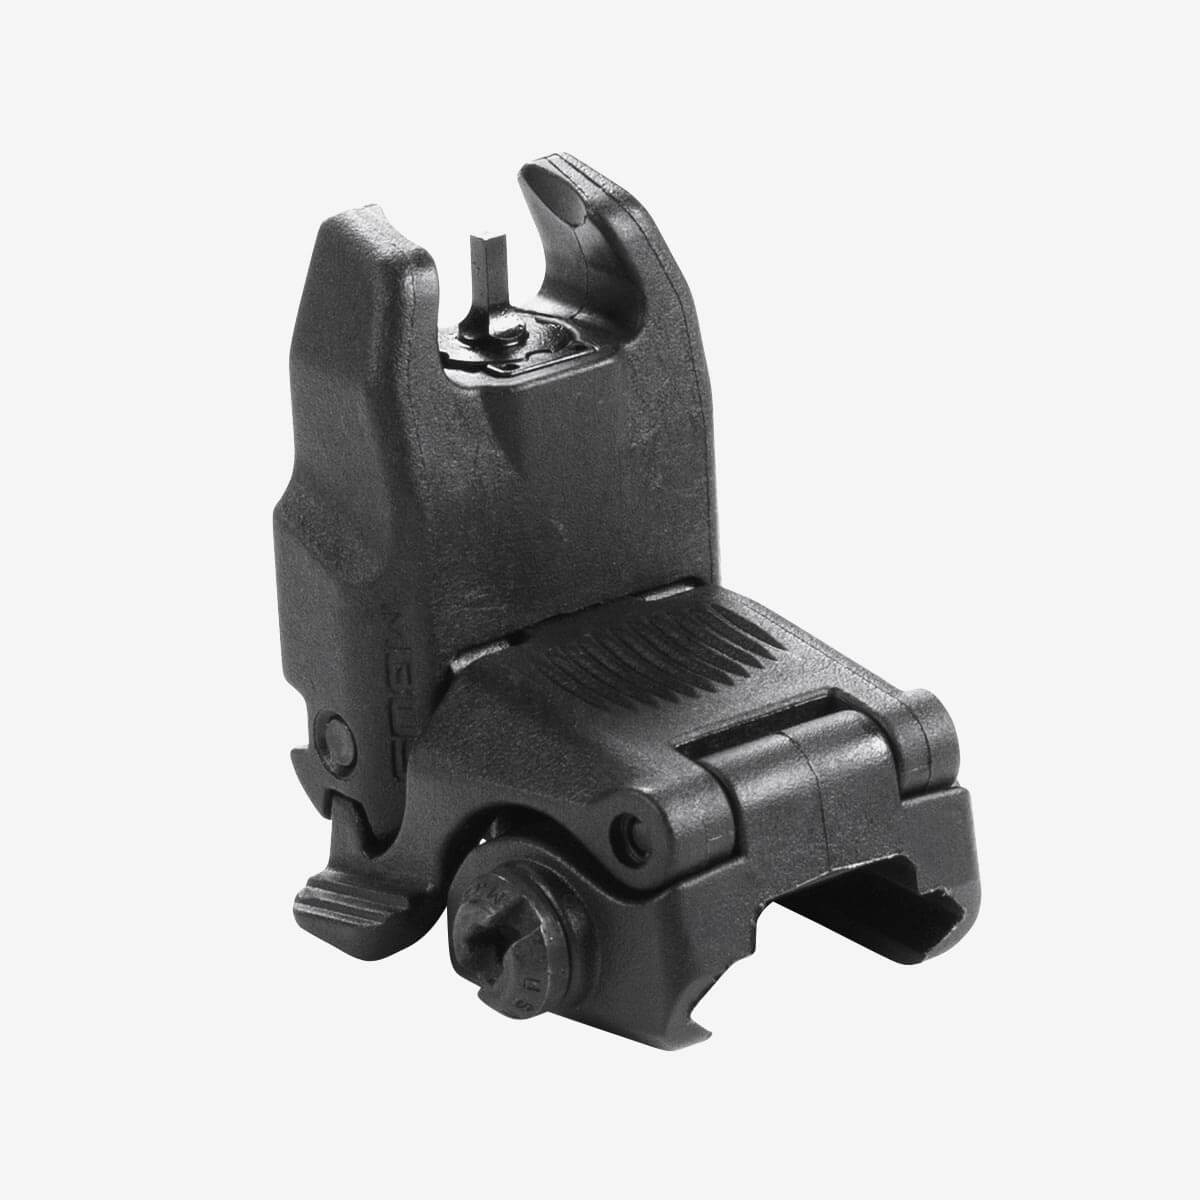 MAG247-BLK - MBUS Sight - Front